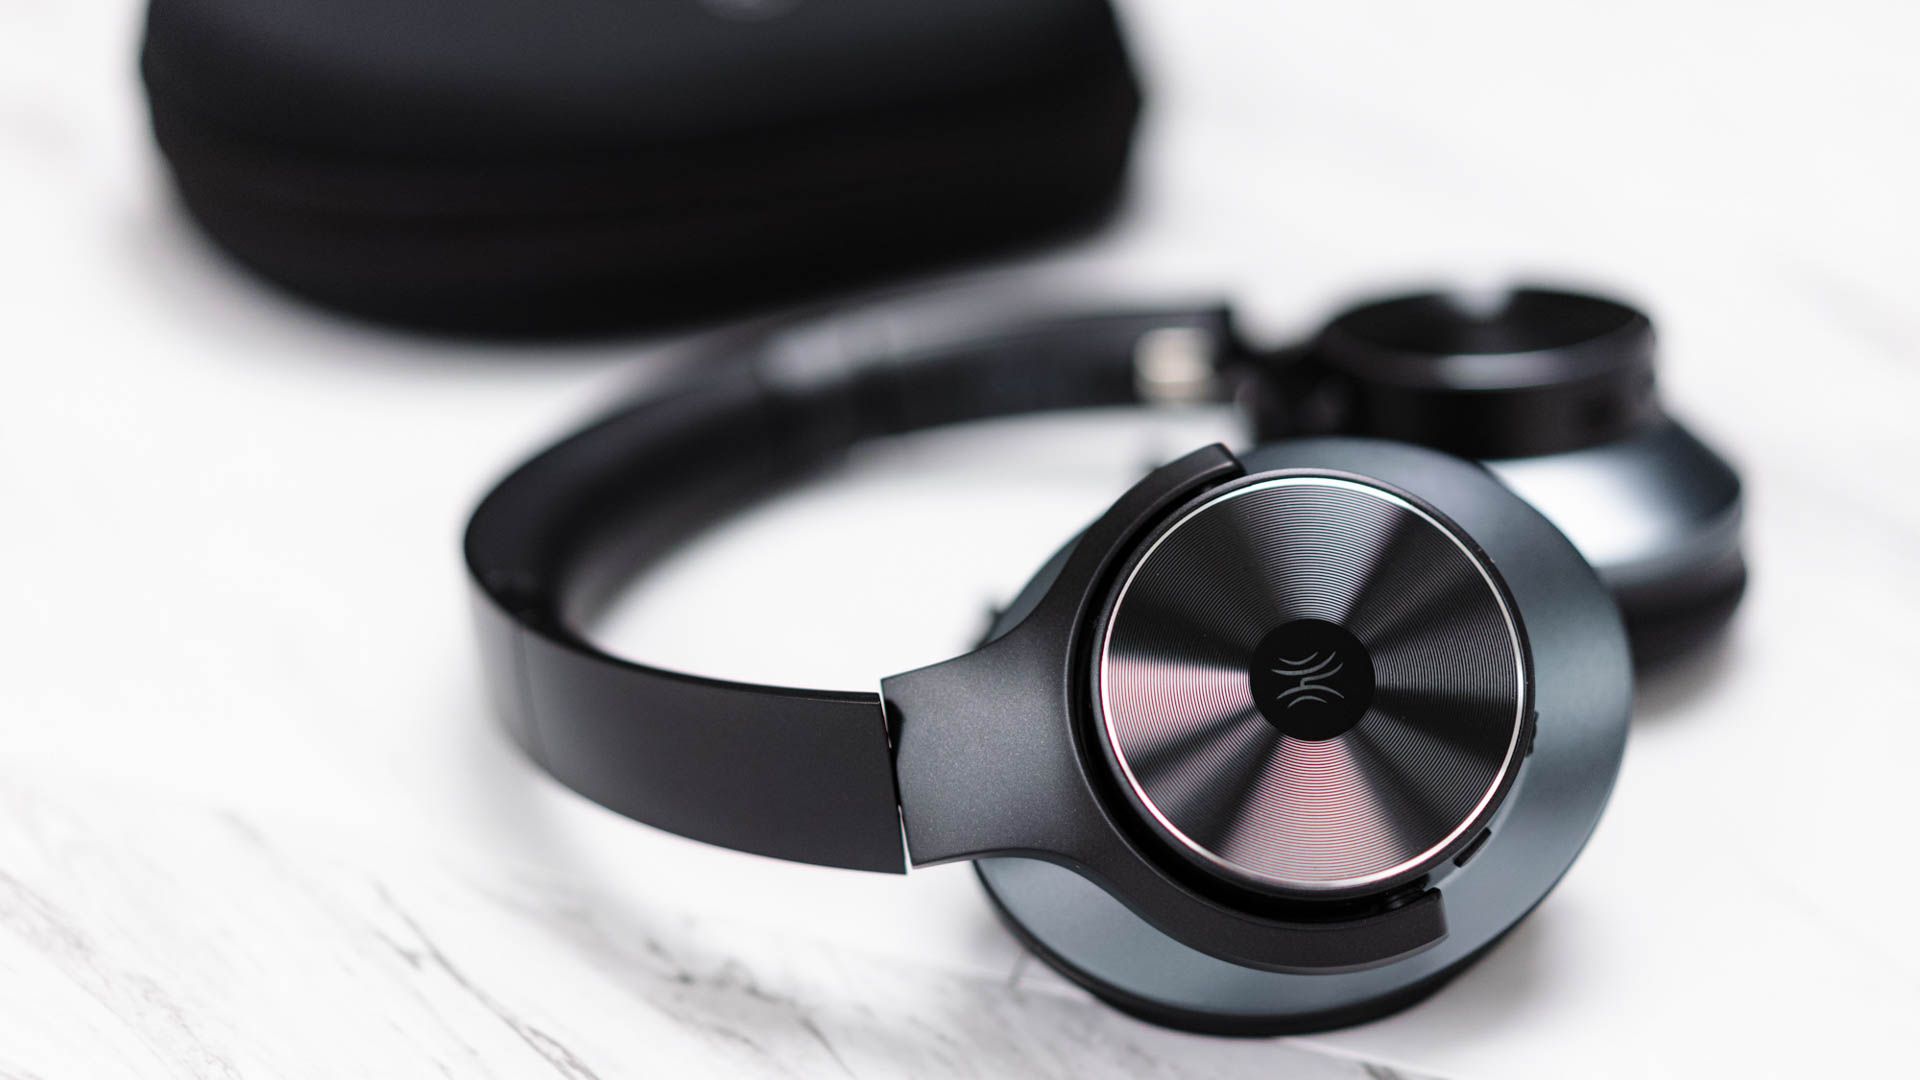 OneOdio logo on the A10 Hybrid Active Noise Cancelling Headphones